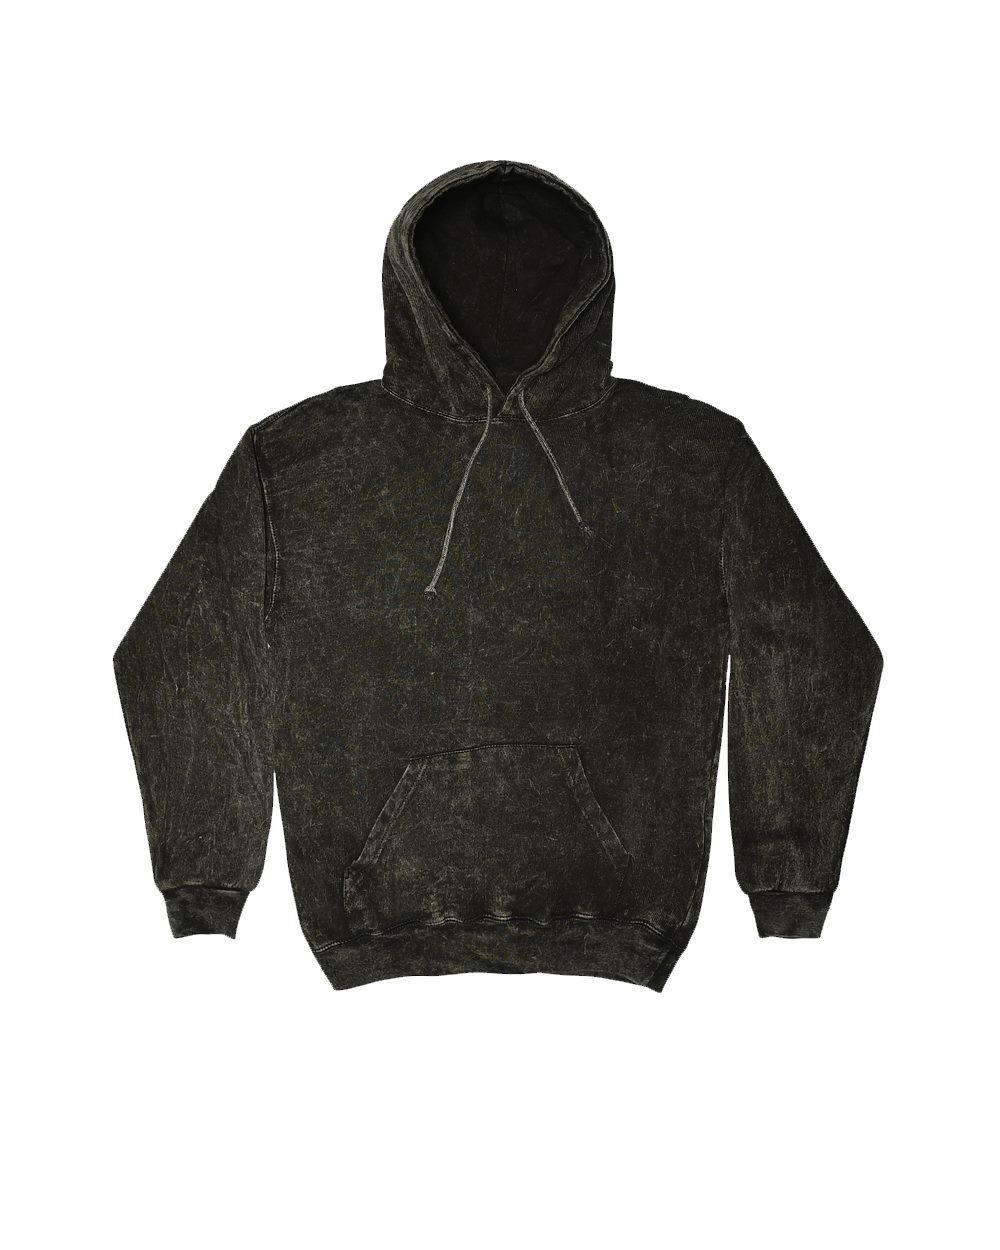 Image for Mineral Wash Hooded Sweatshirt - 8300